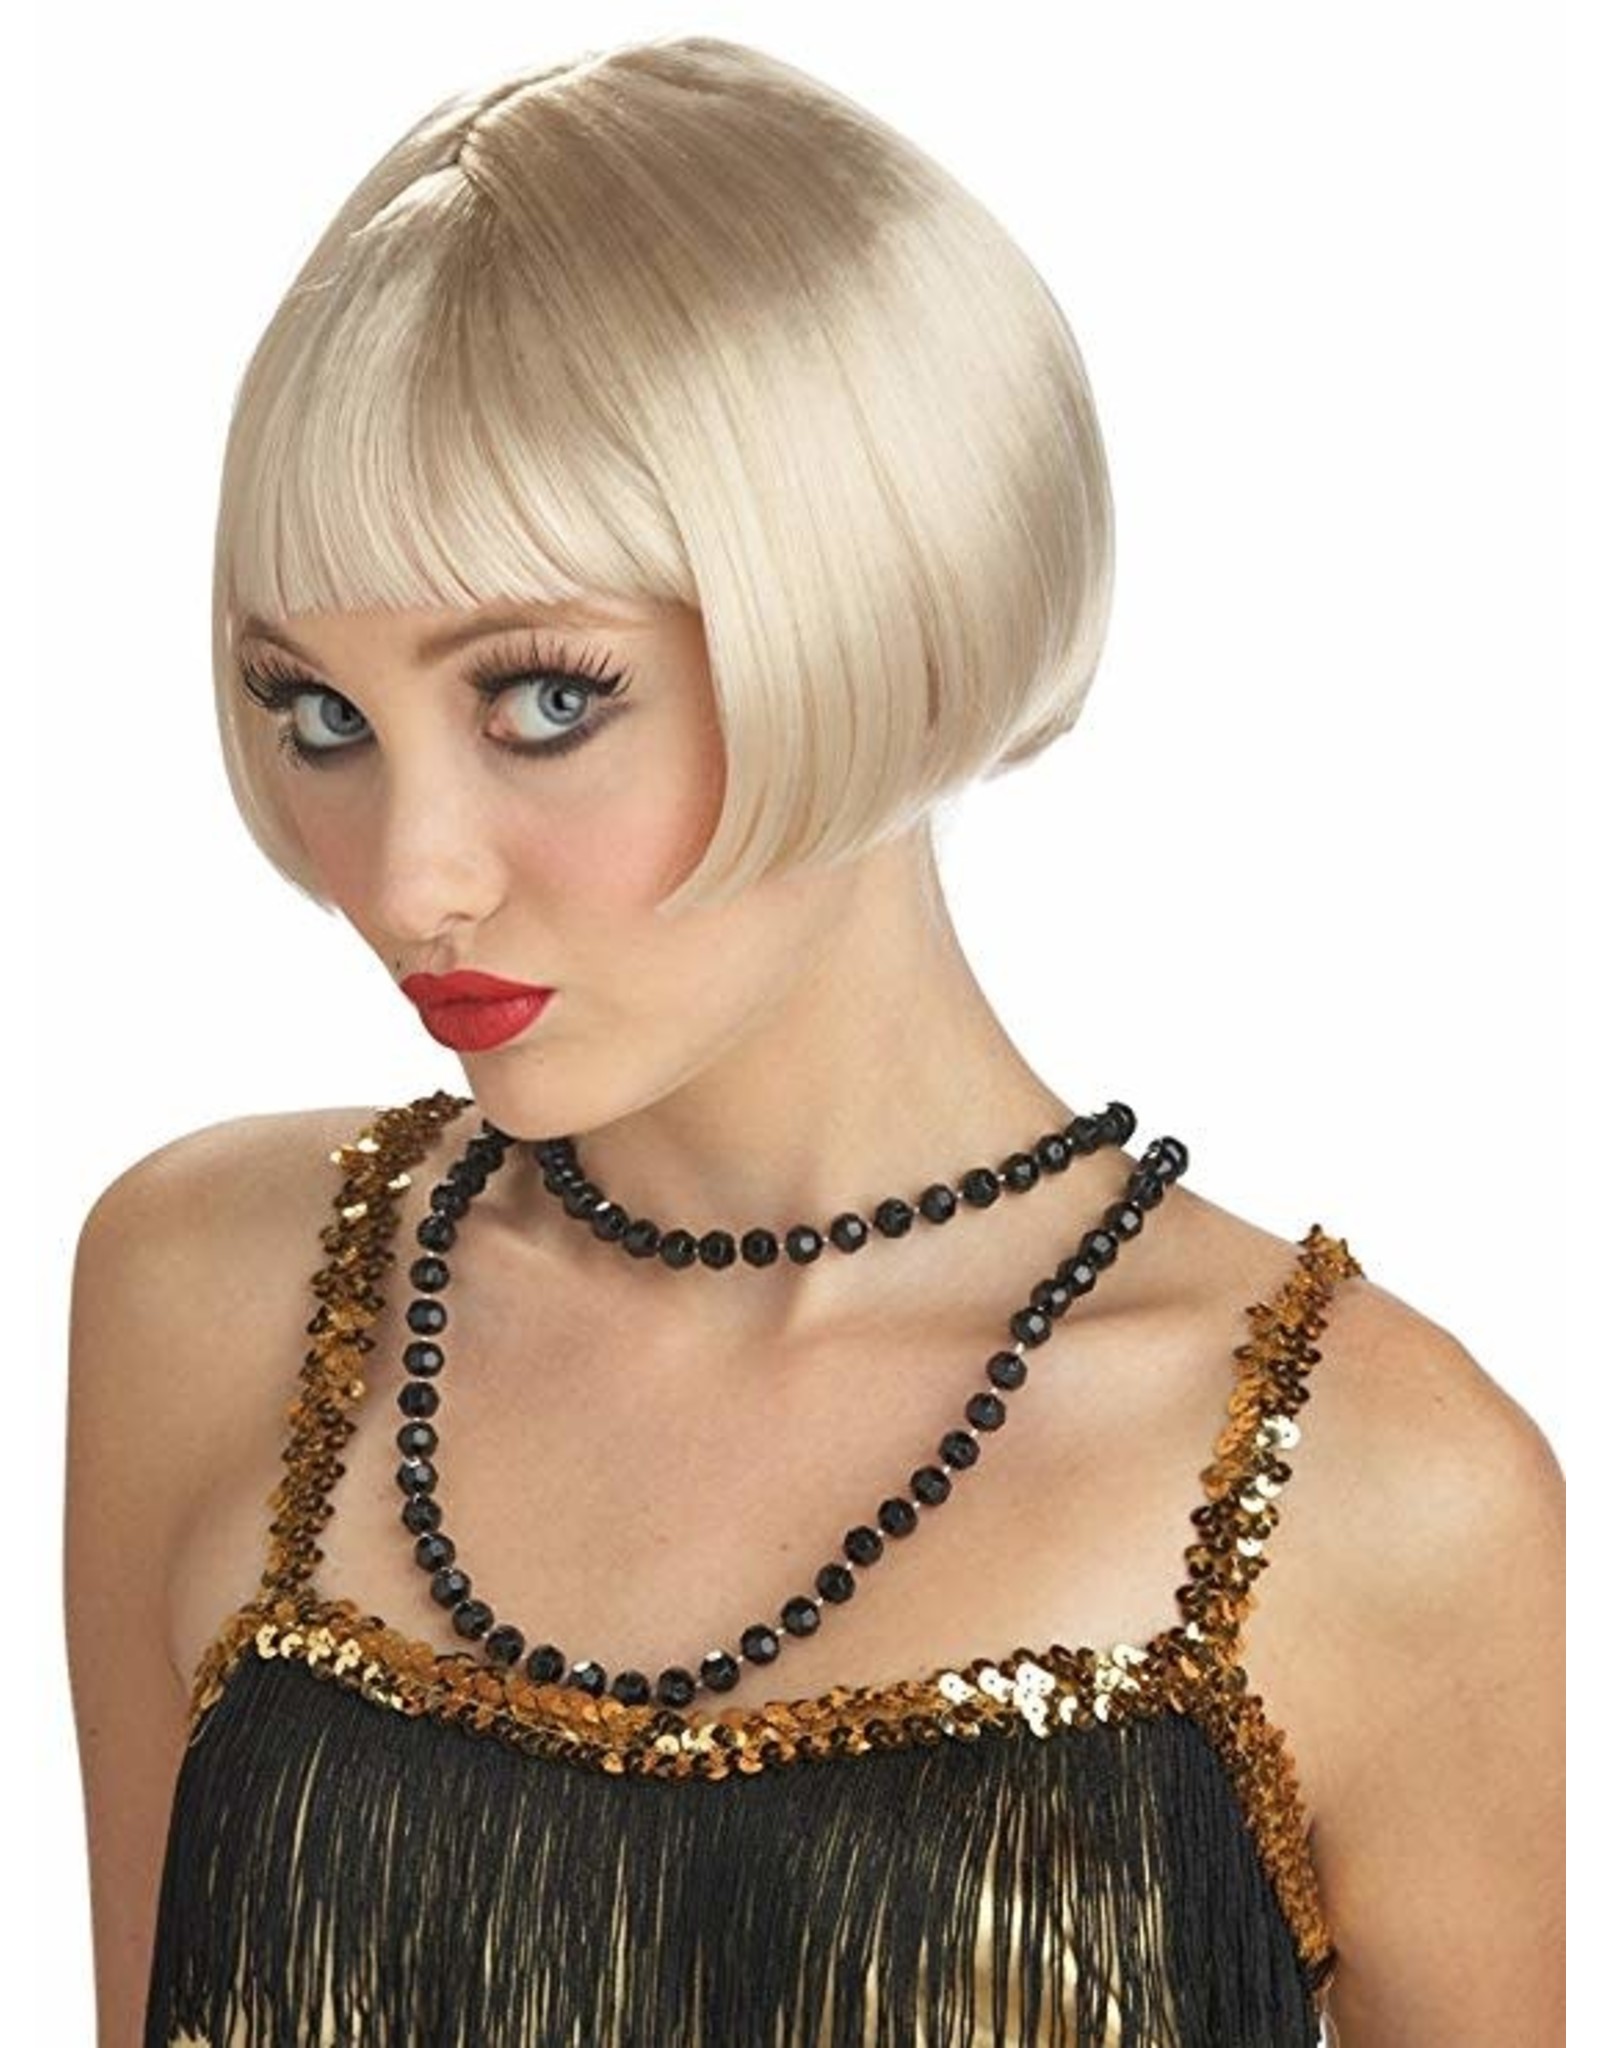 California Costume Collections Flirty Flapper, Blonde, Adult